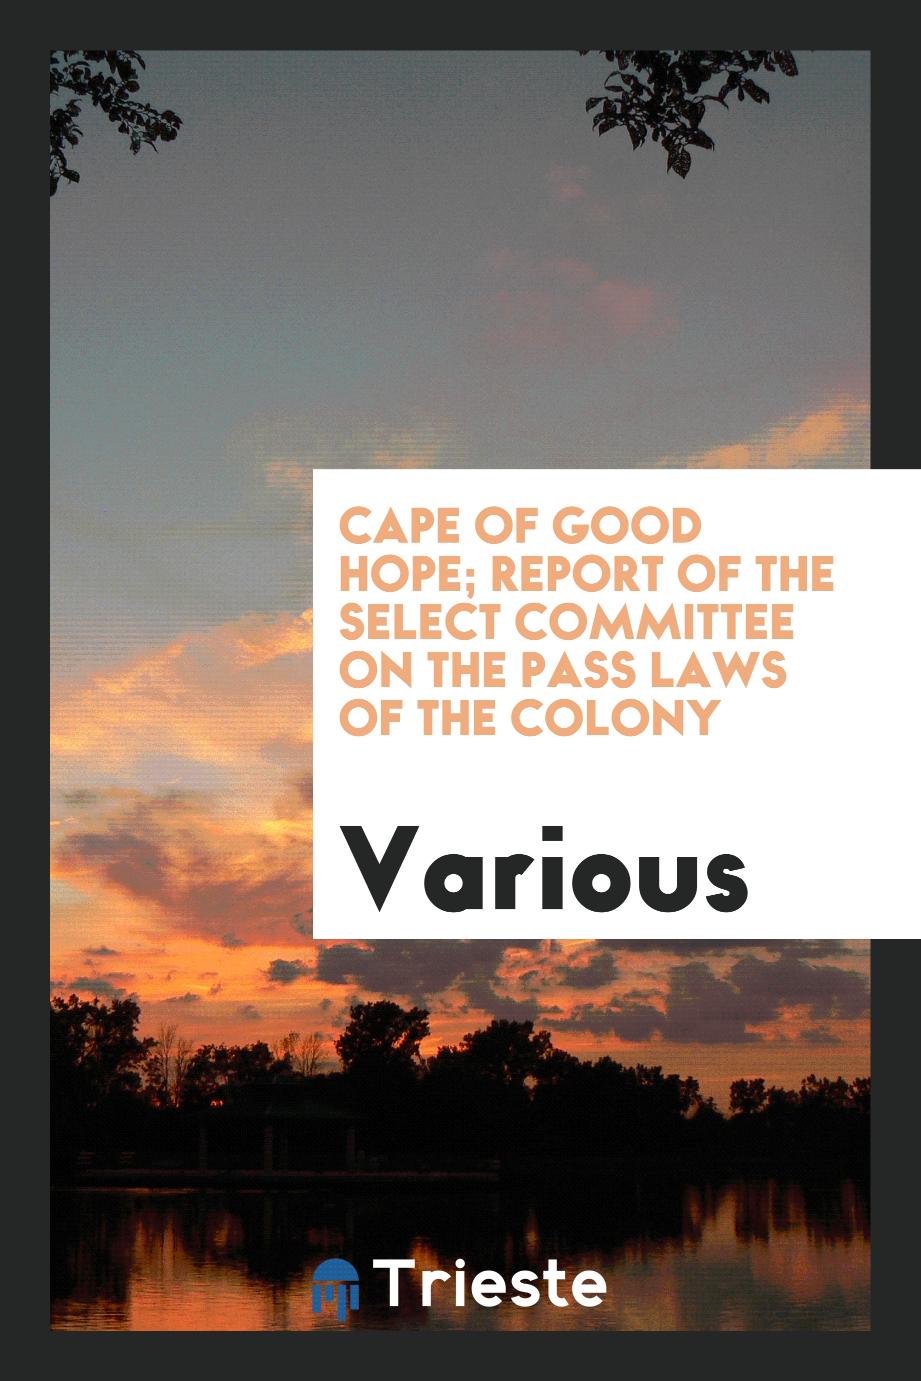 Cape of Good Hope; Report of the Select Committee on the Pass Laws of the Colony